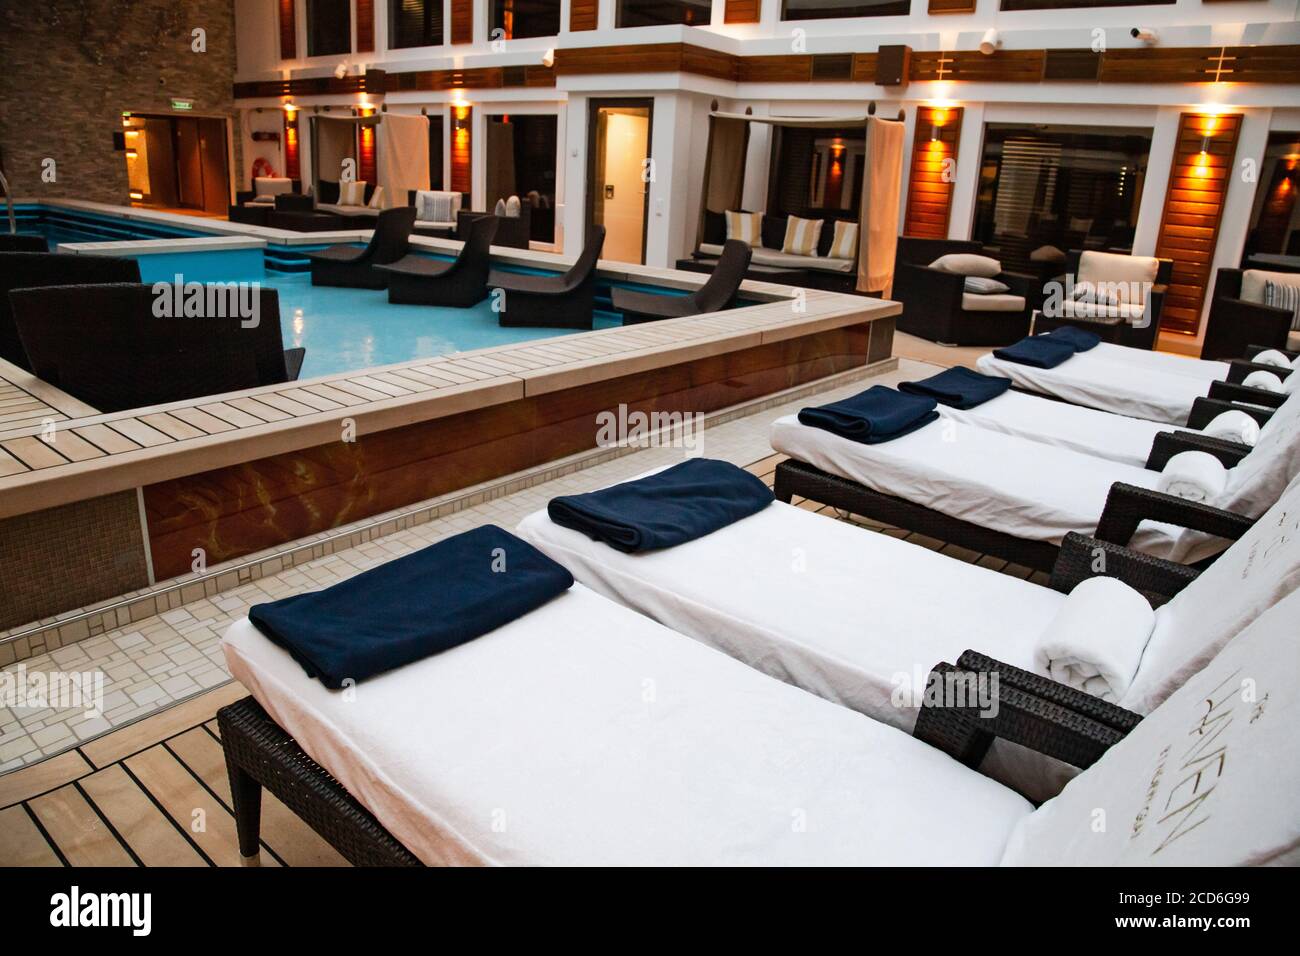 The Haven courtyard has a pool, hot tubs and lounge chairs in exclusive area on board the Norwegian Joy NCL cruise ship Stock Photo